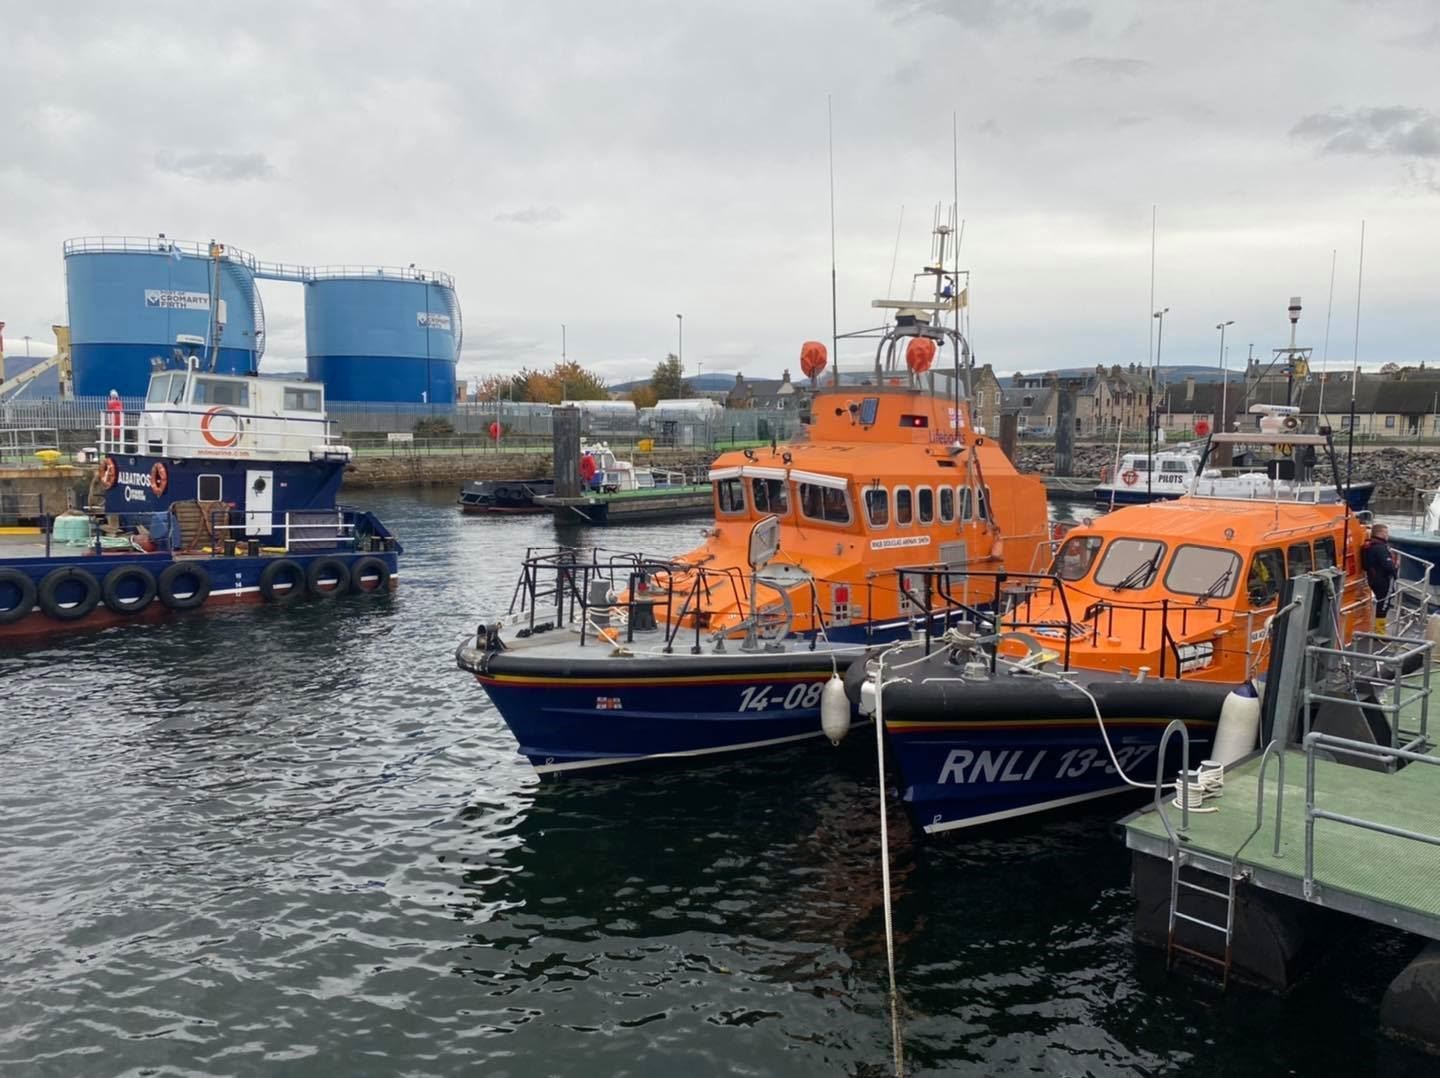 Invergordon RNLI is looking for volunteers to fill a number of important roles.